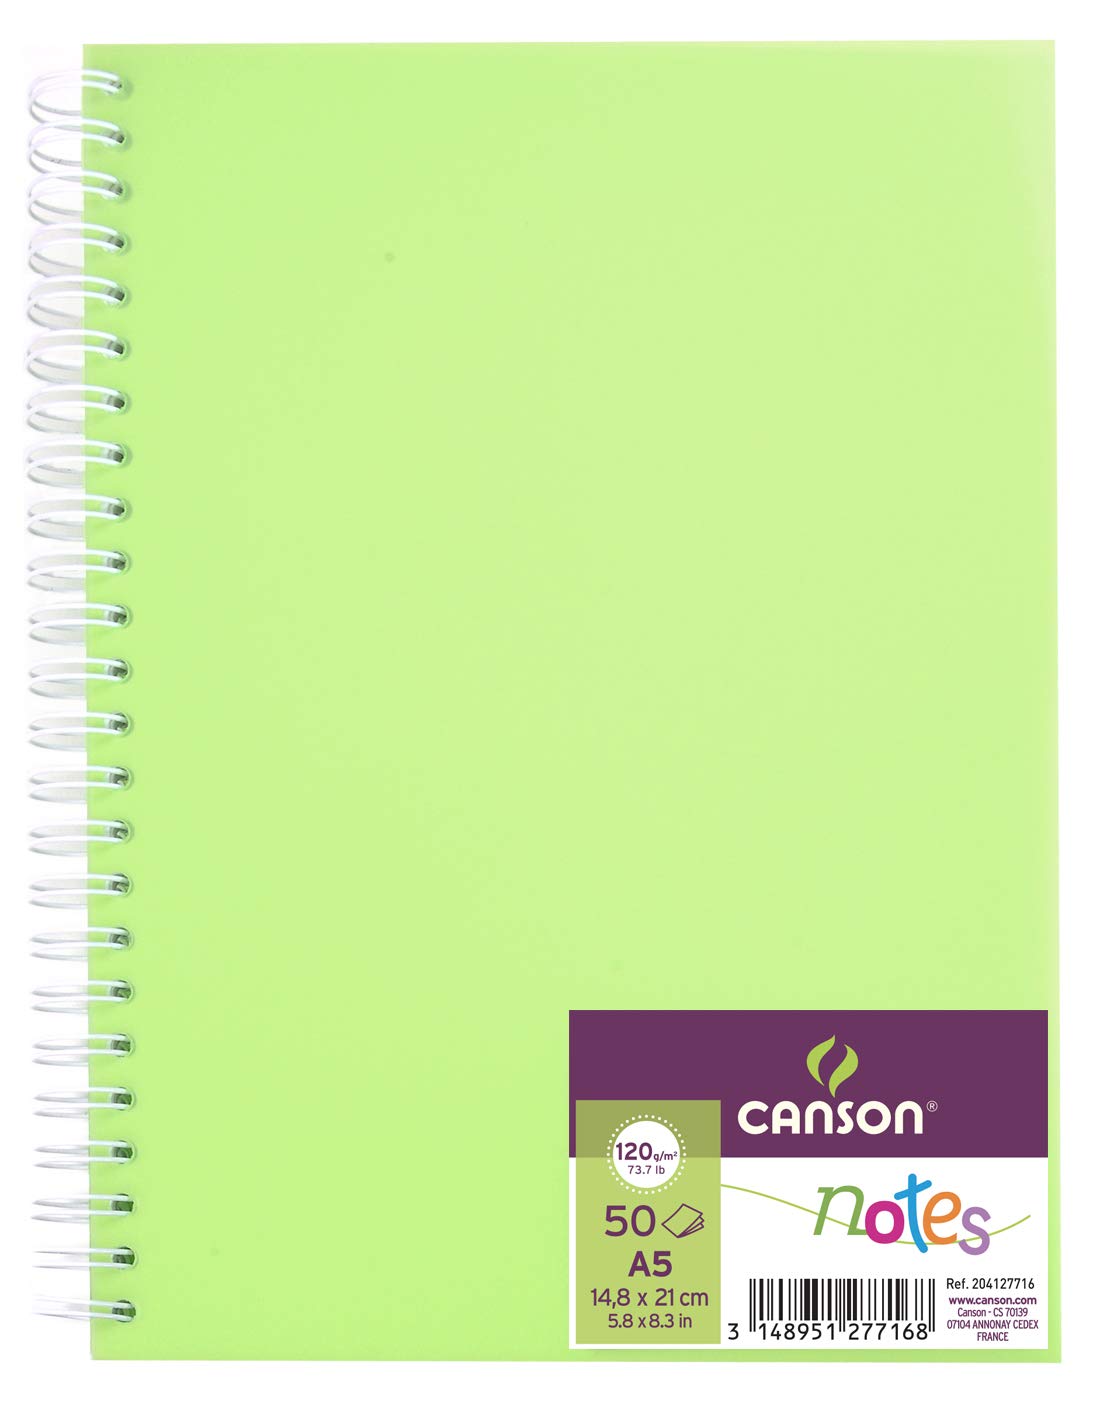 Cuaderno canson notes 50h 120g a5 verde